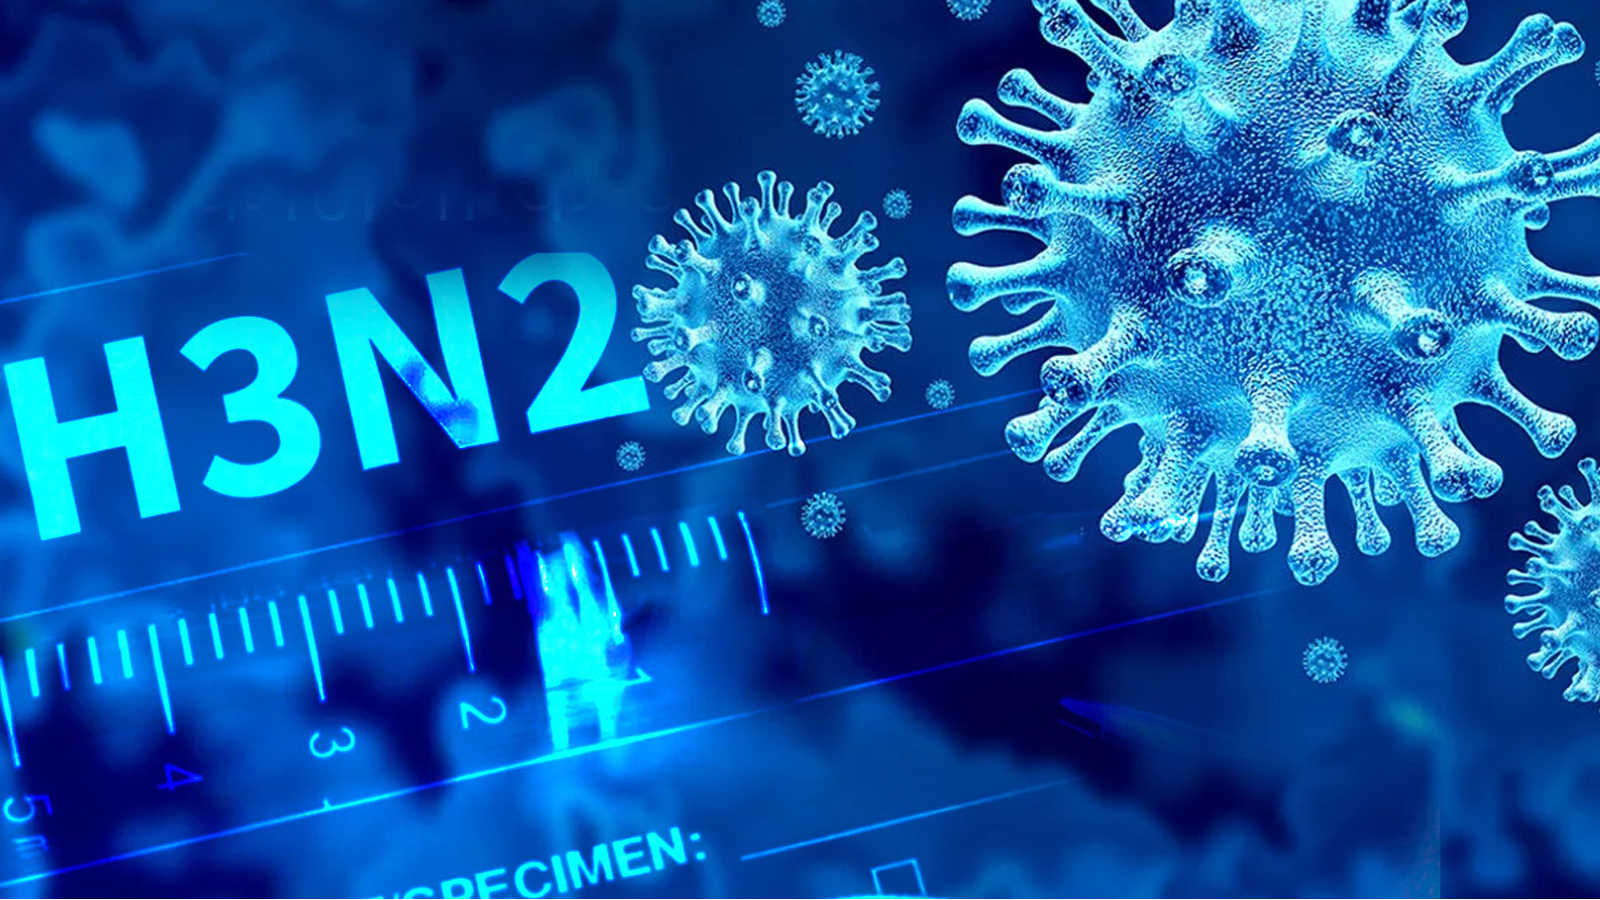 2 deaths due to H3N2